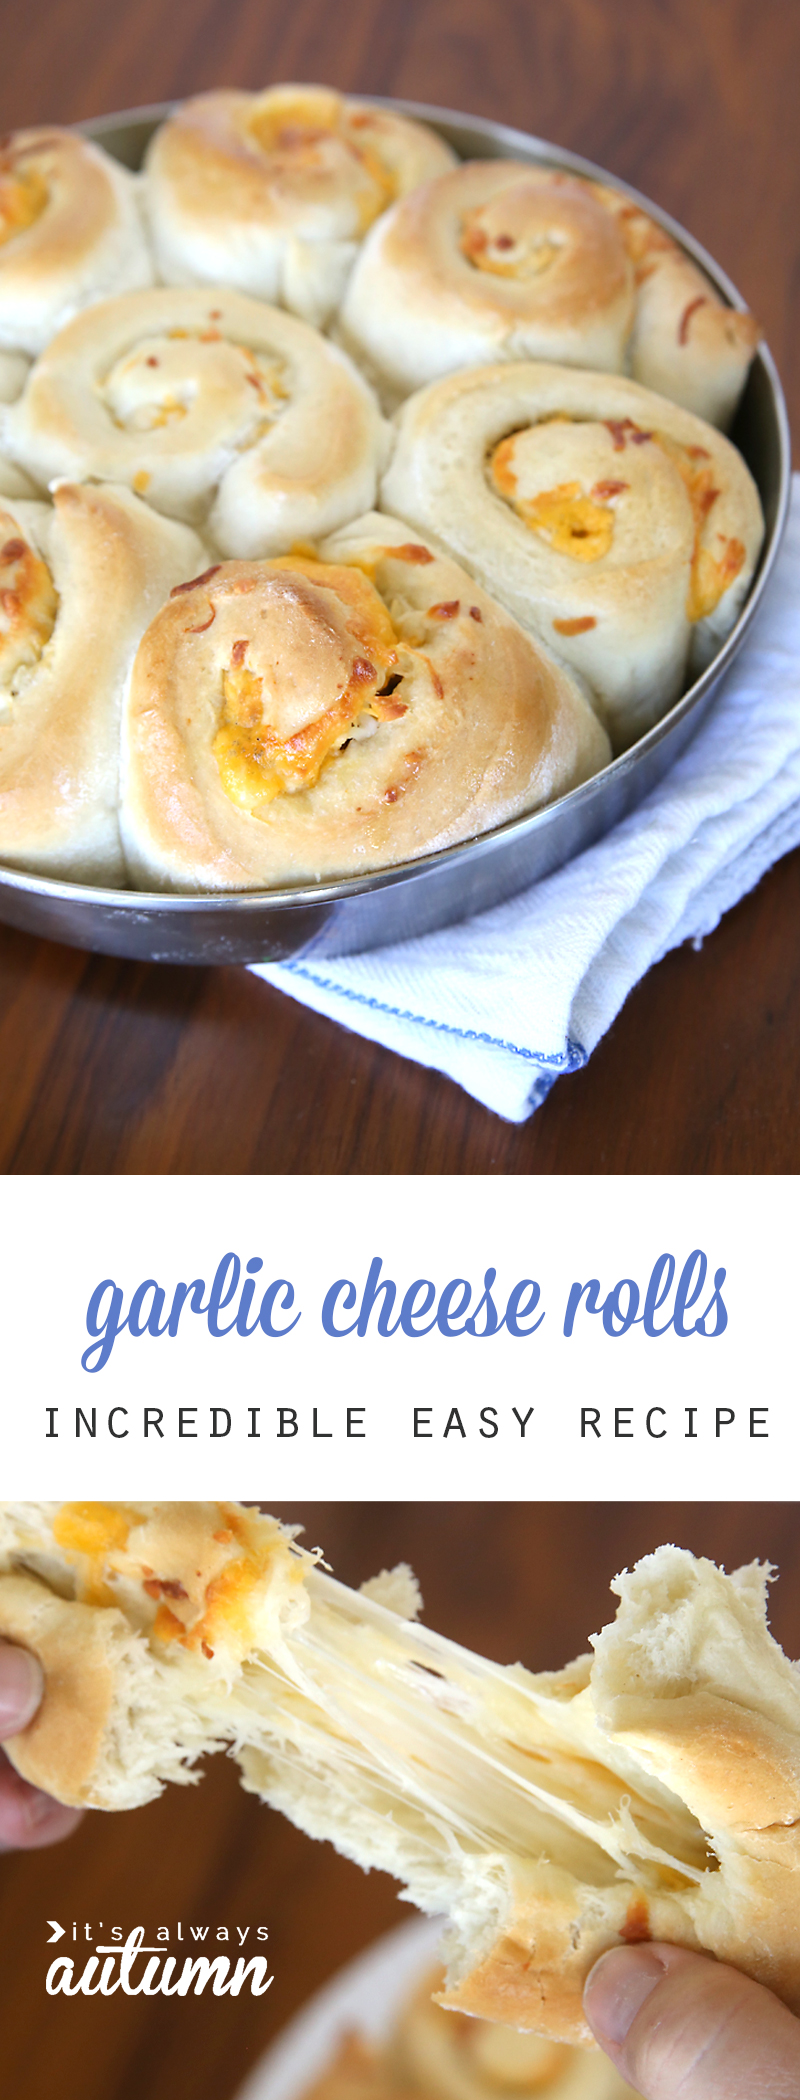 garlic cheese rolls in a round pan; hands pulling apart a garlic cheese roll